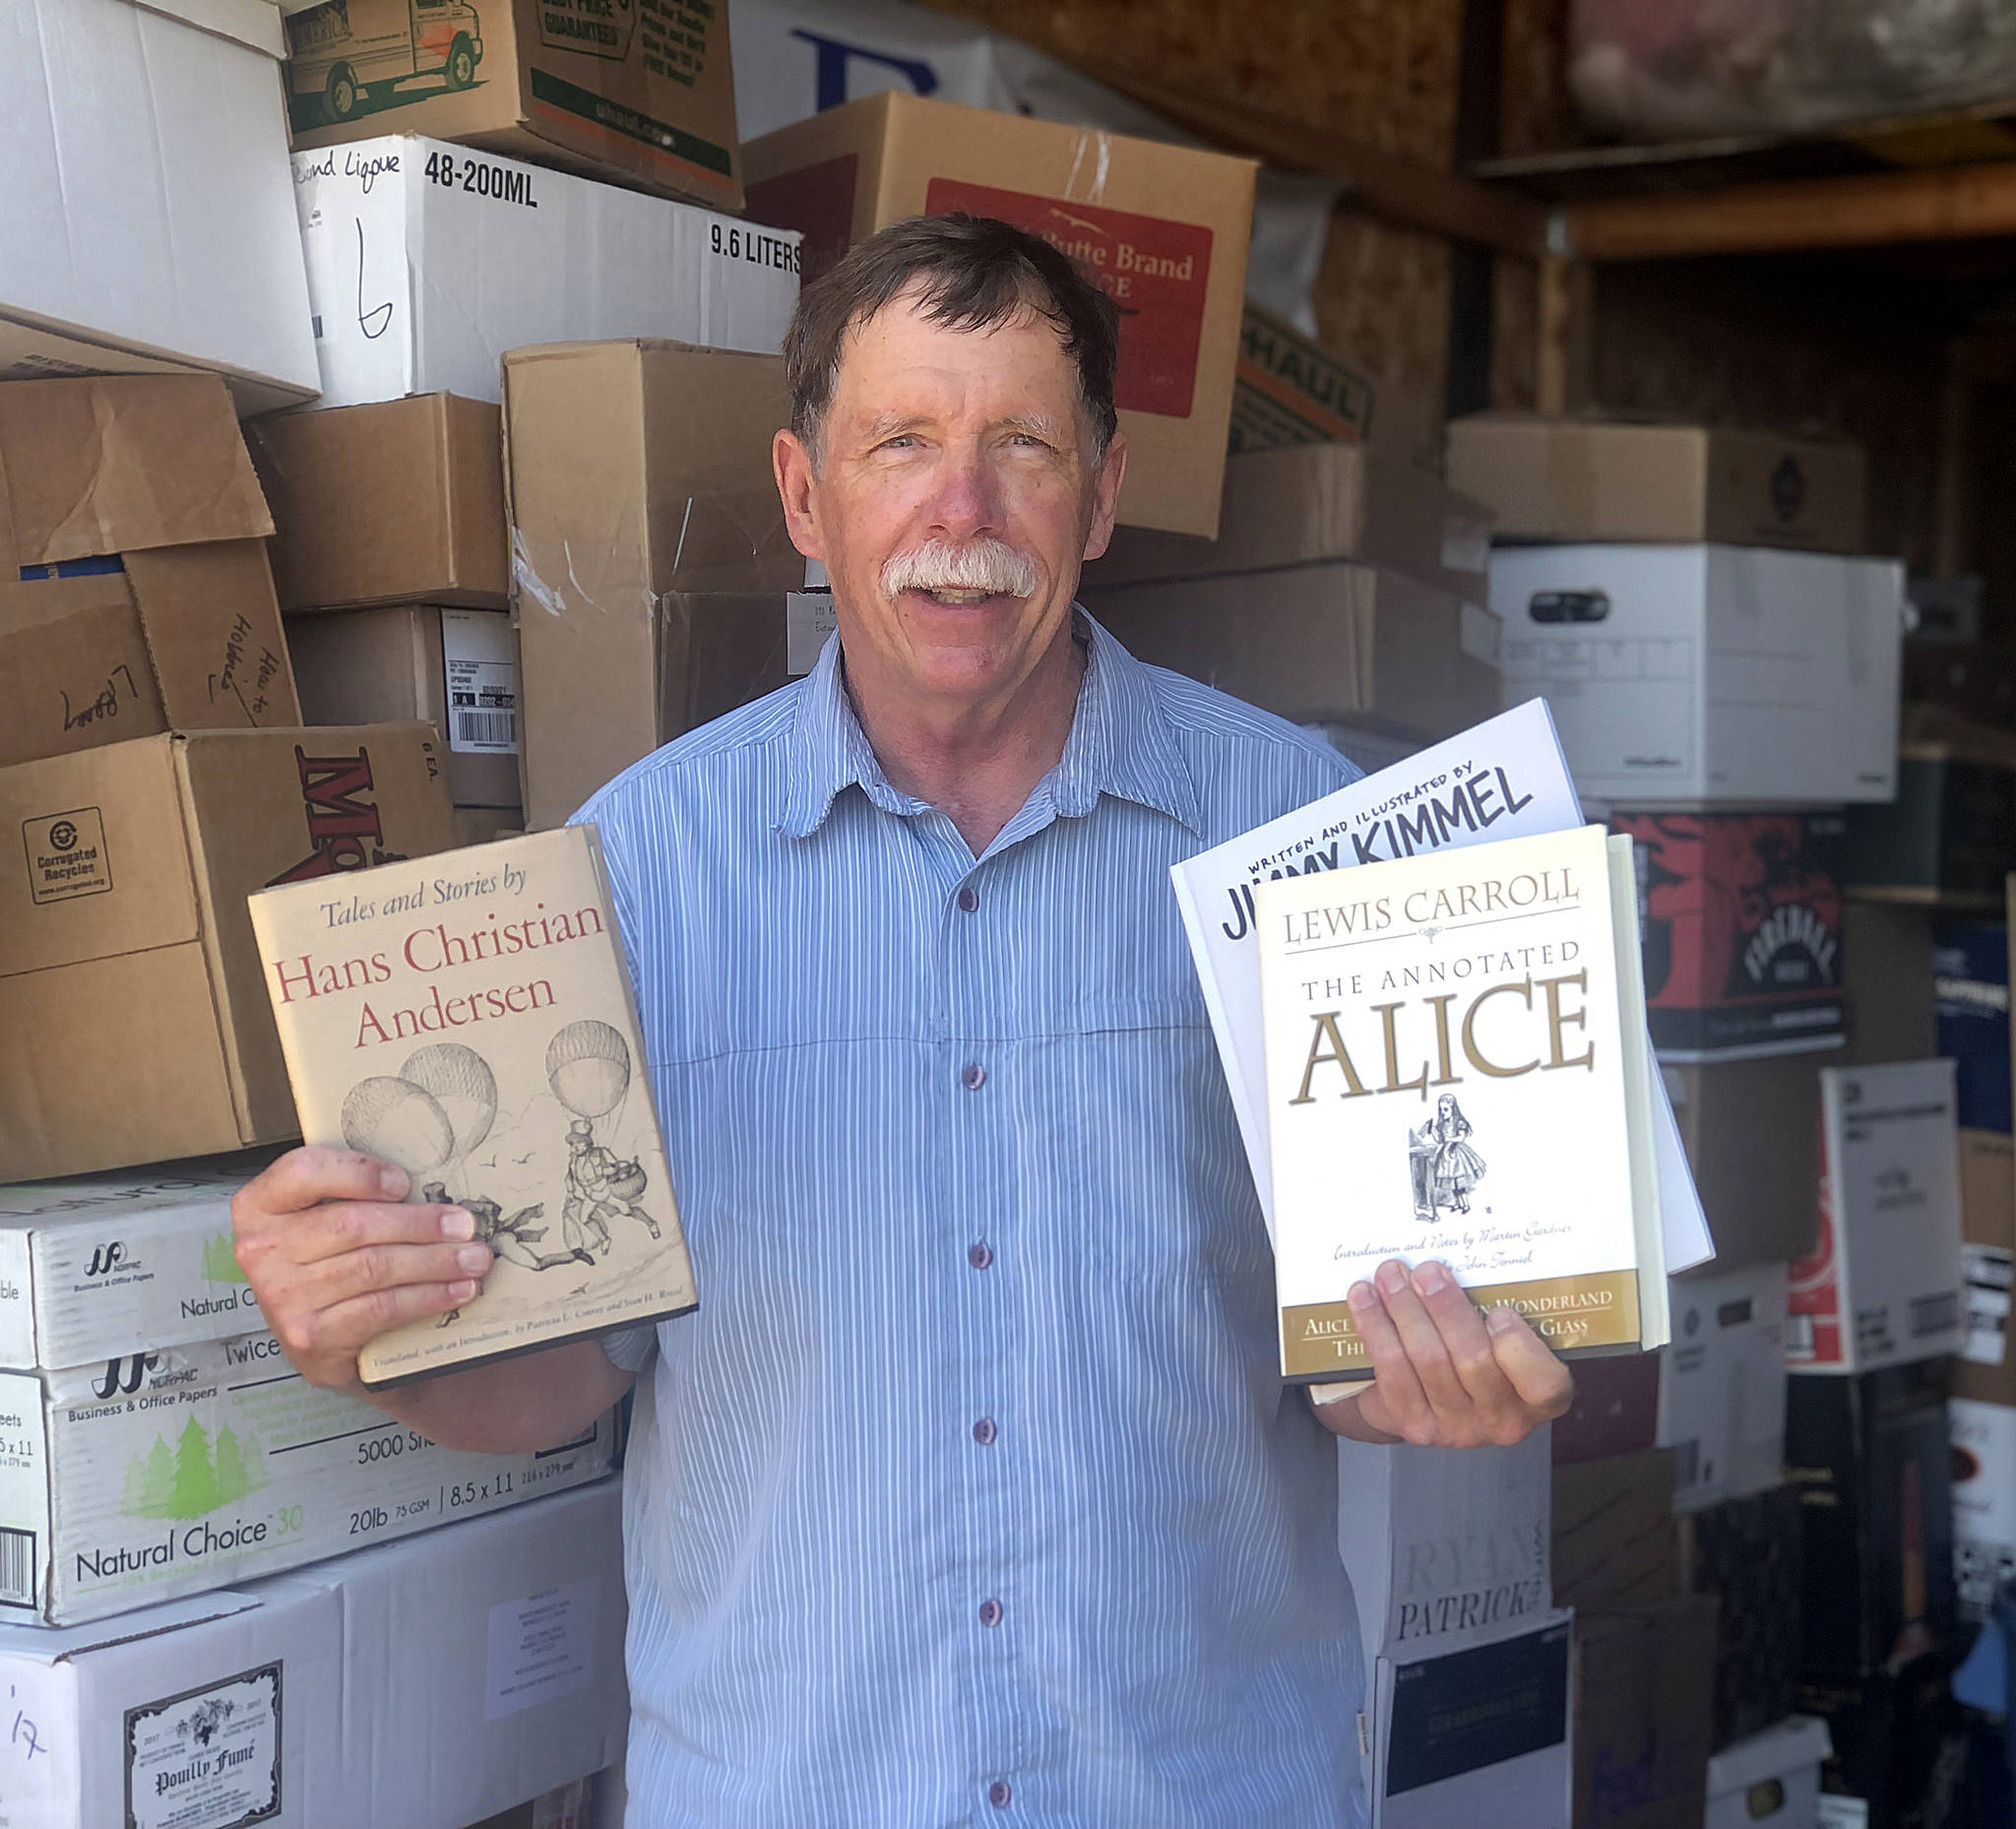 Colleen Smith/staff photo
Friends of the Orcas Library board chair Ken Gibbs in the storage unit with boxes of books that will be at the sale on Aug. 14.